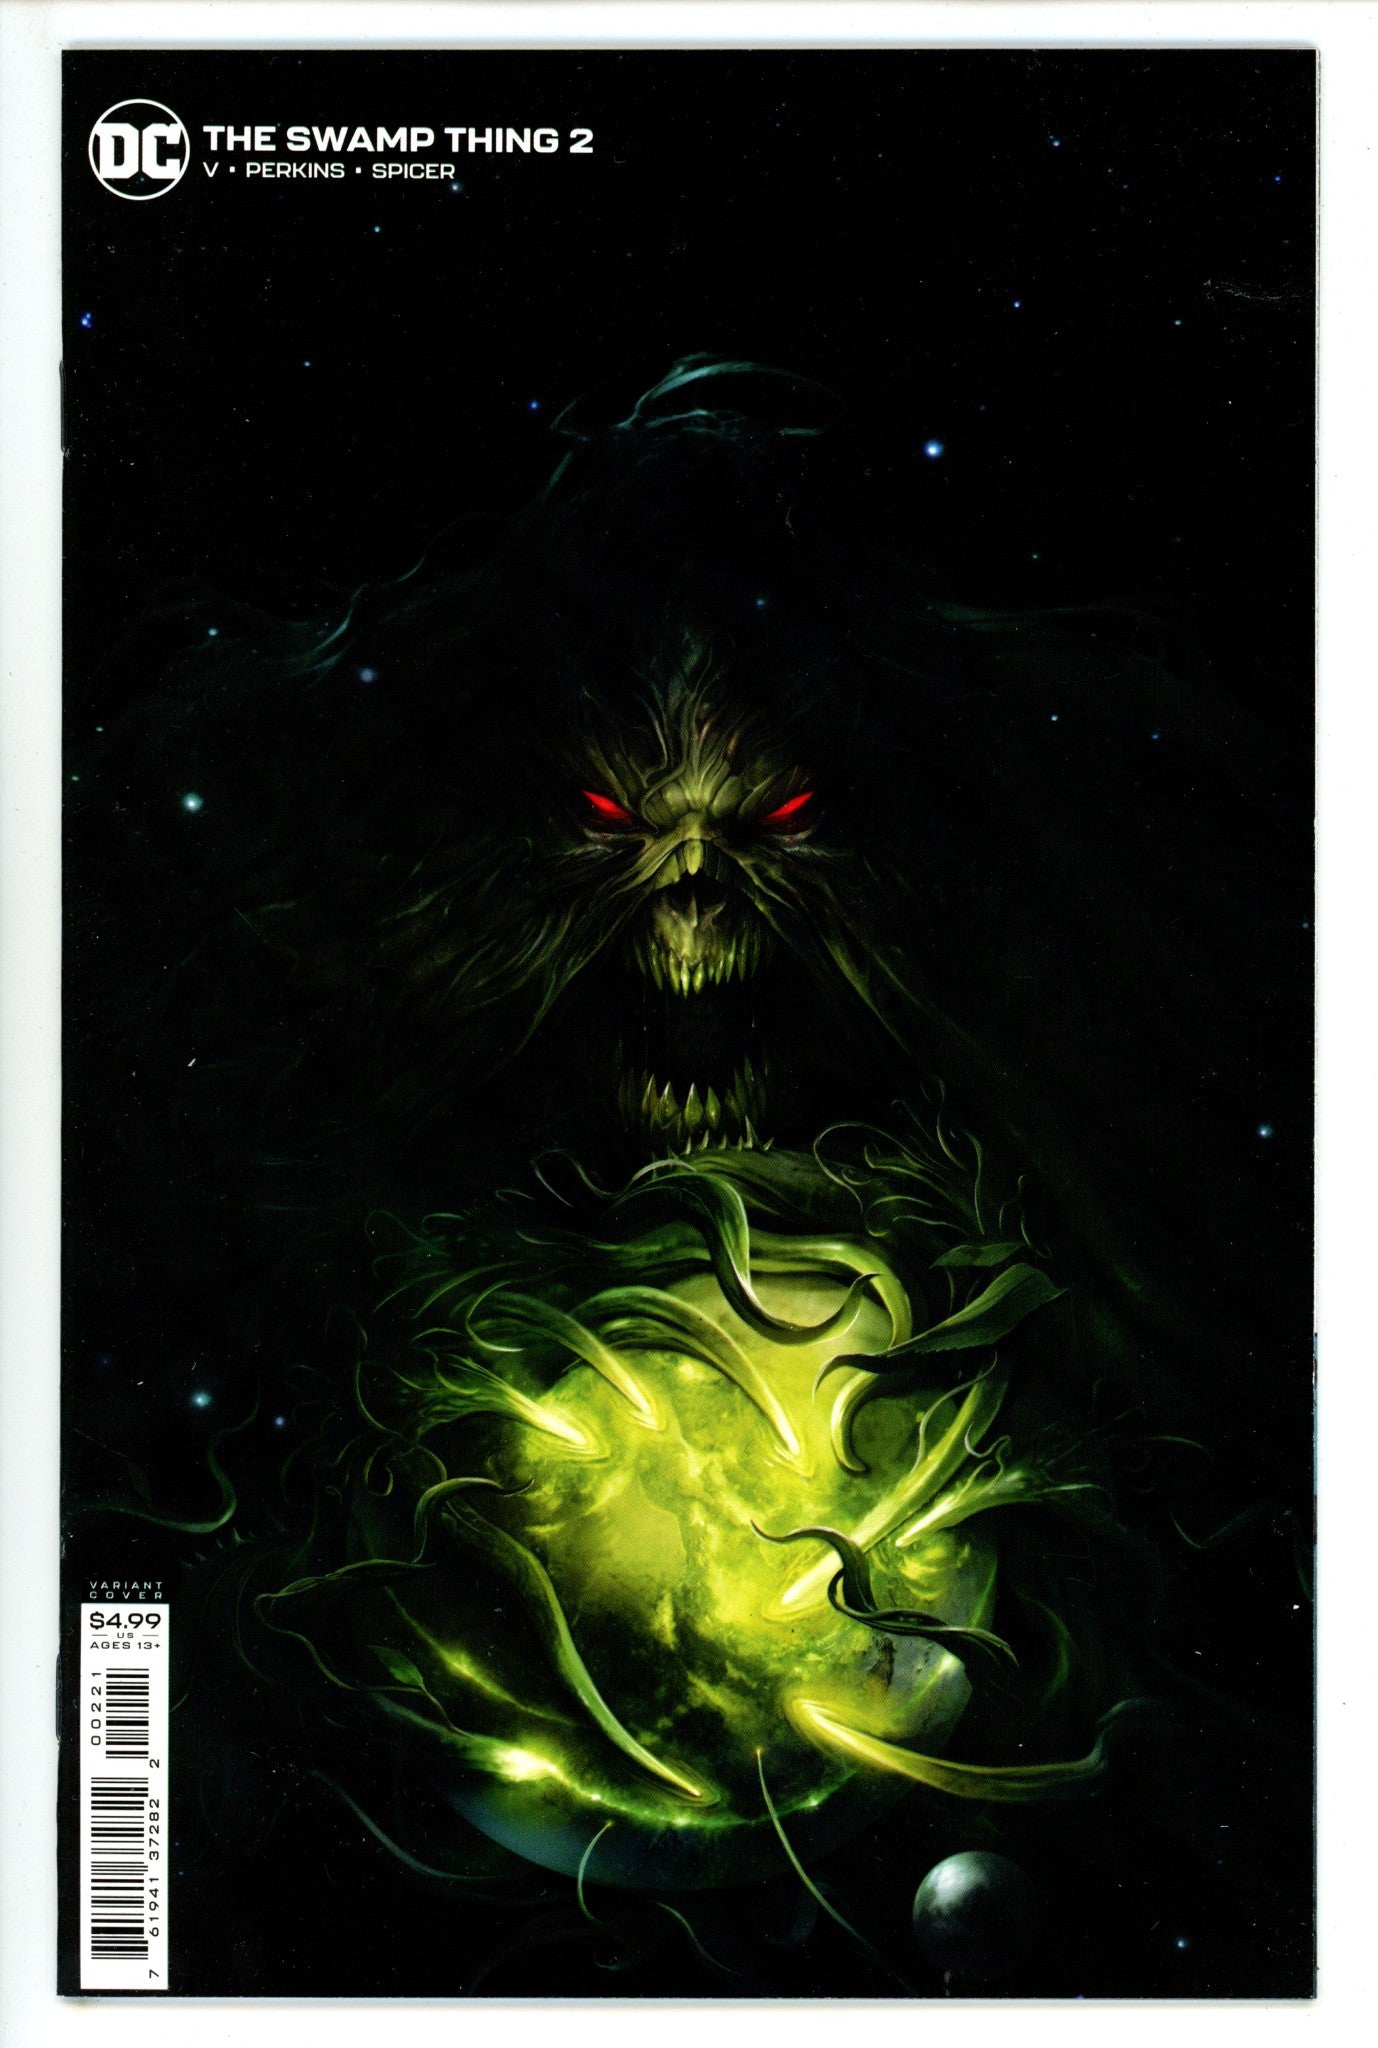 The Swamp Thing Vol 7 2 High Grade (2021) Variant 